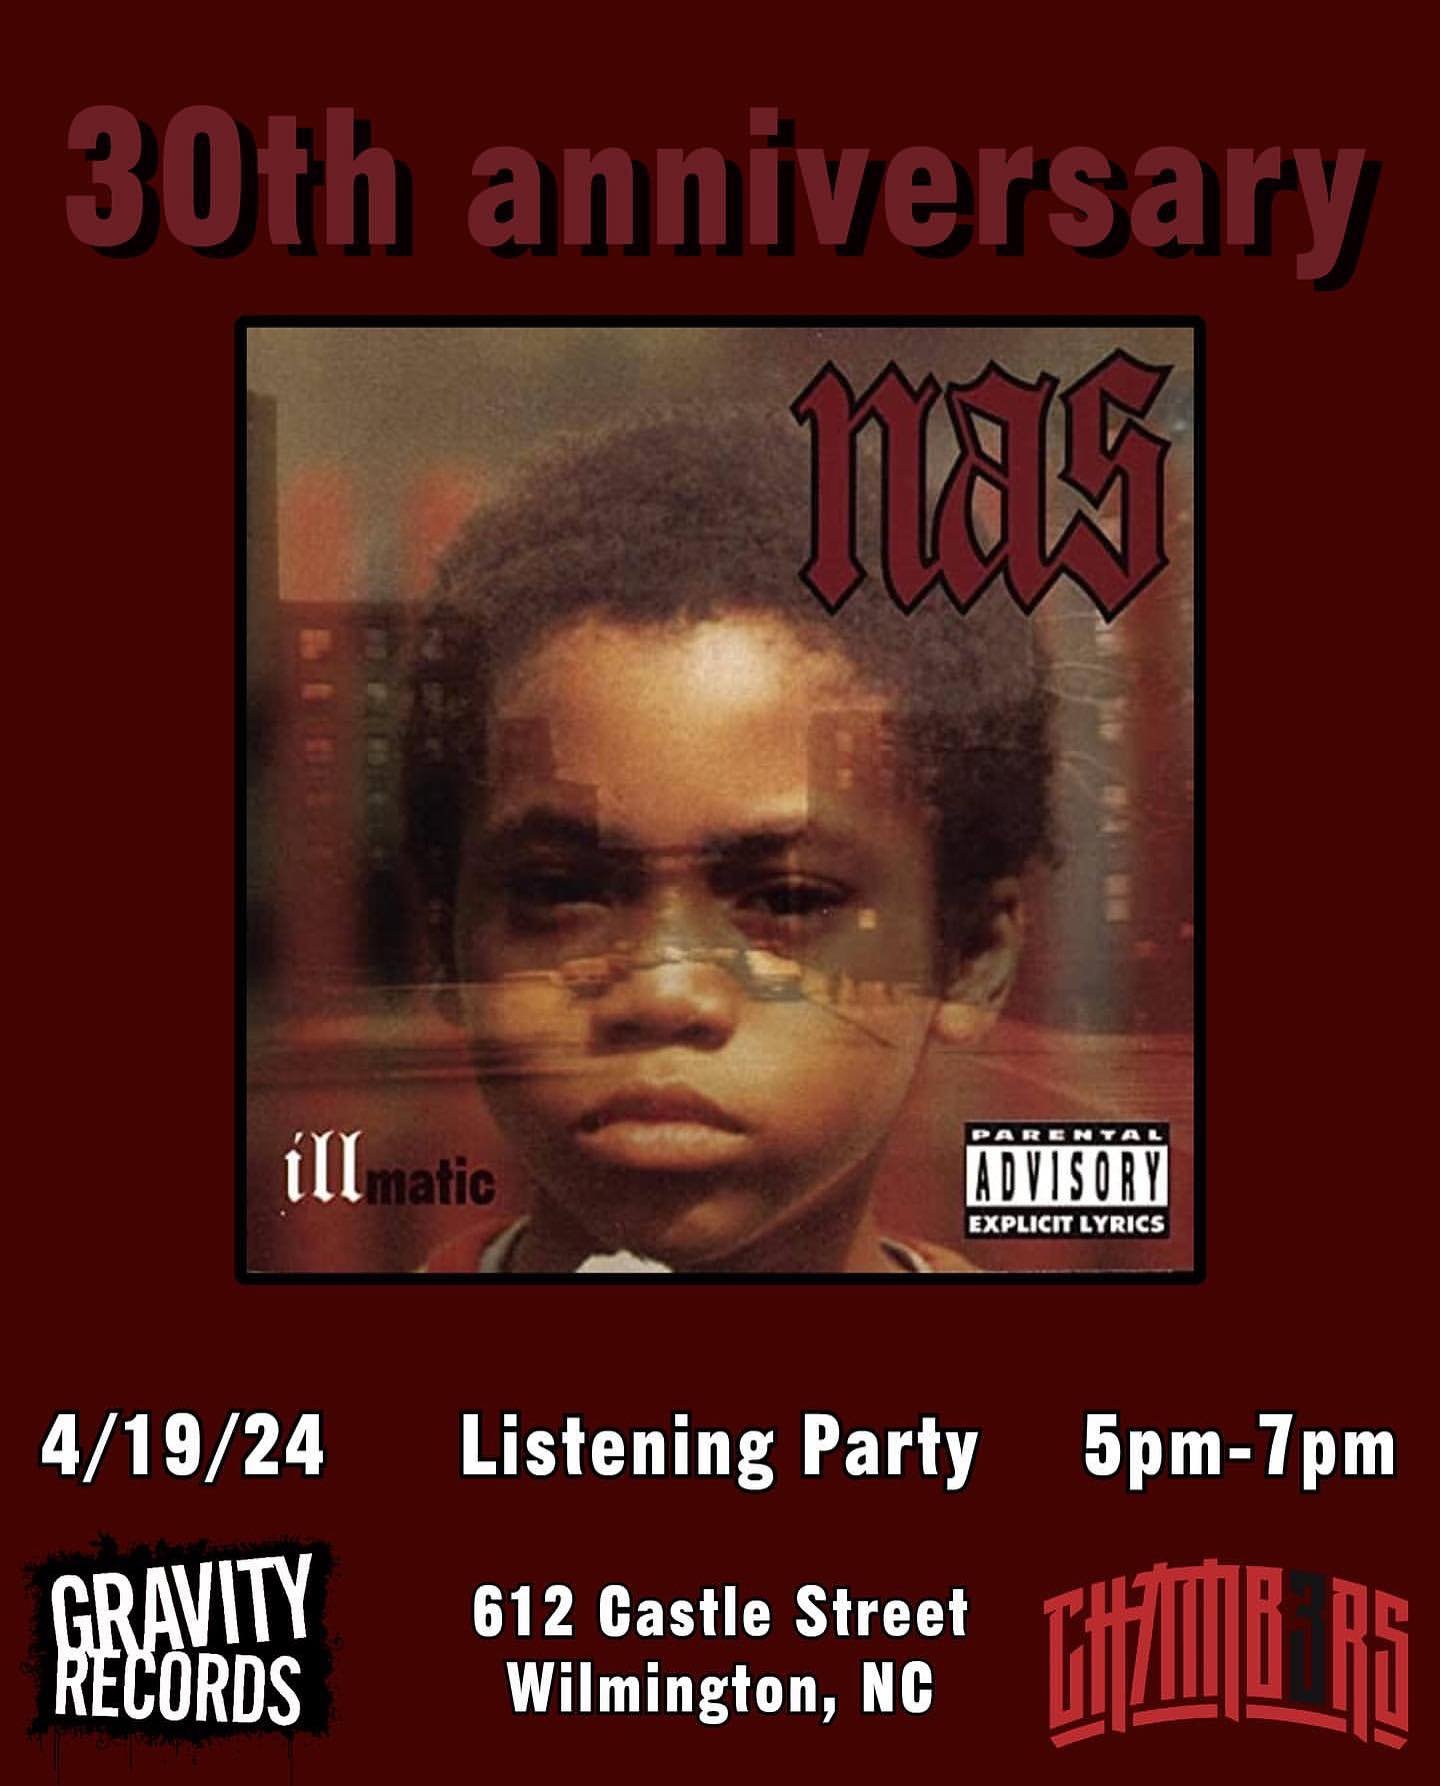 Join us tomorrow at 5 PM at @gravityrecords in Wilmington, NC for the ILLMATIC: 30th Anniversary Listening Party. @mocksie_ilm will also be there.🍹

Free to attend!